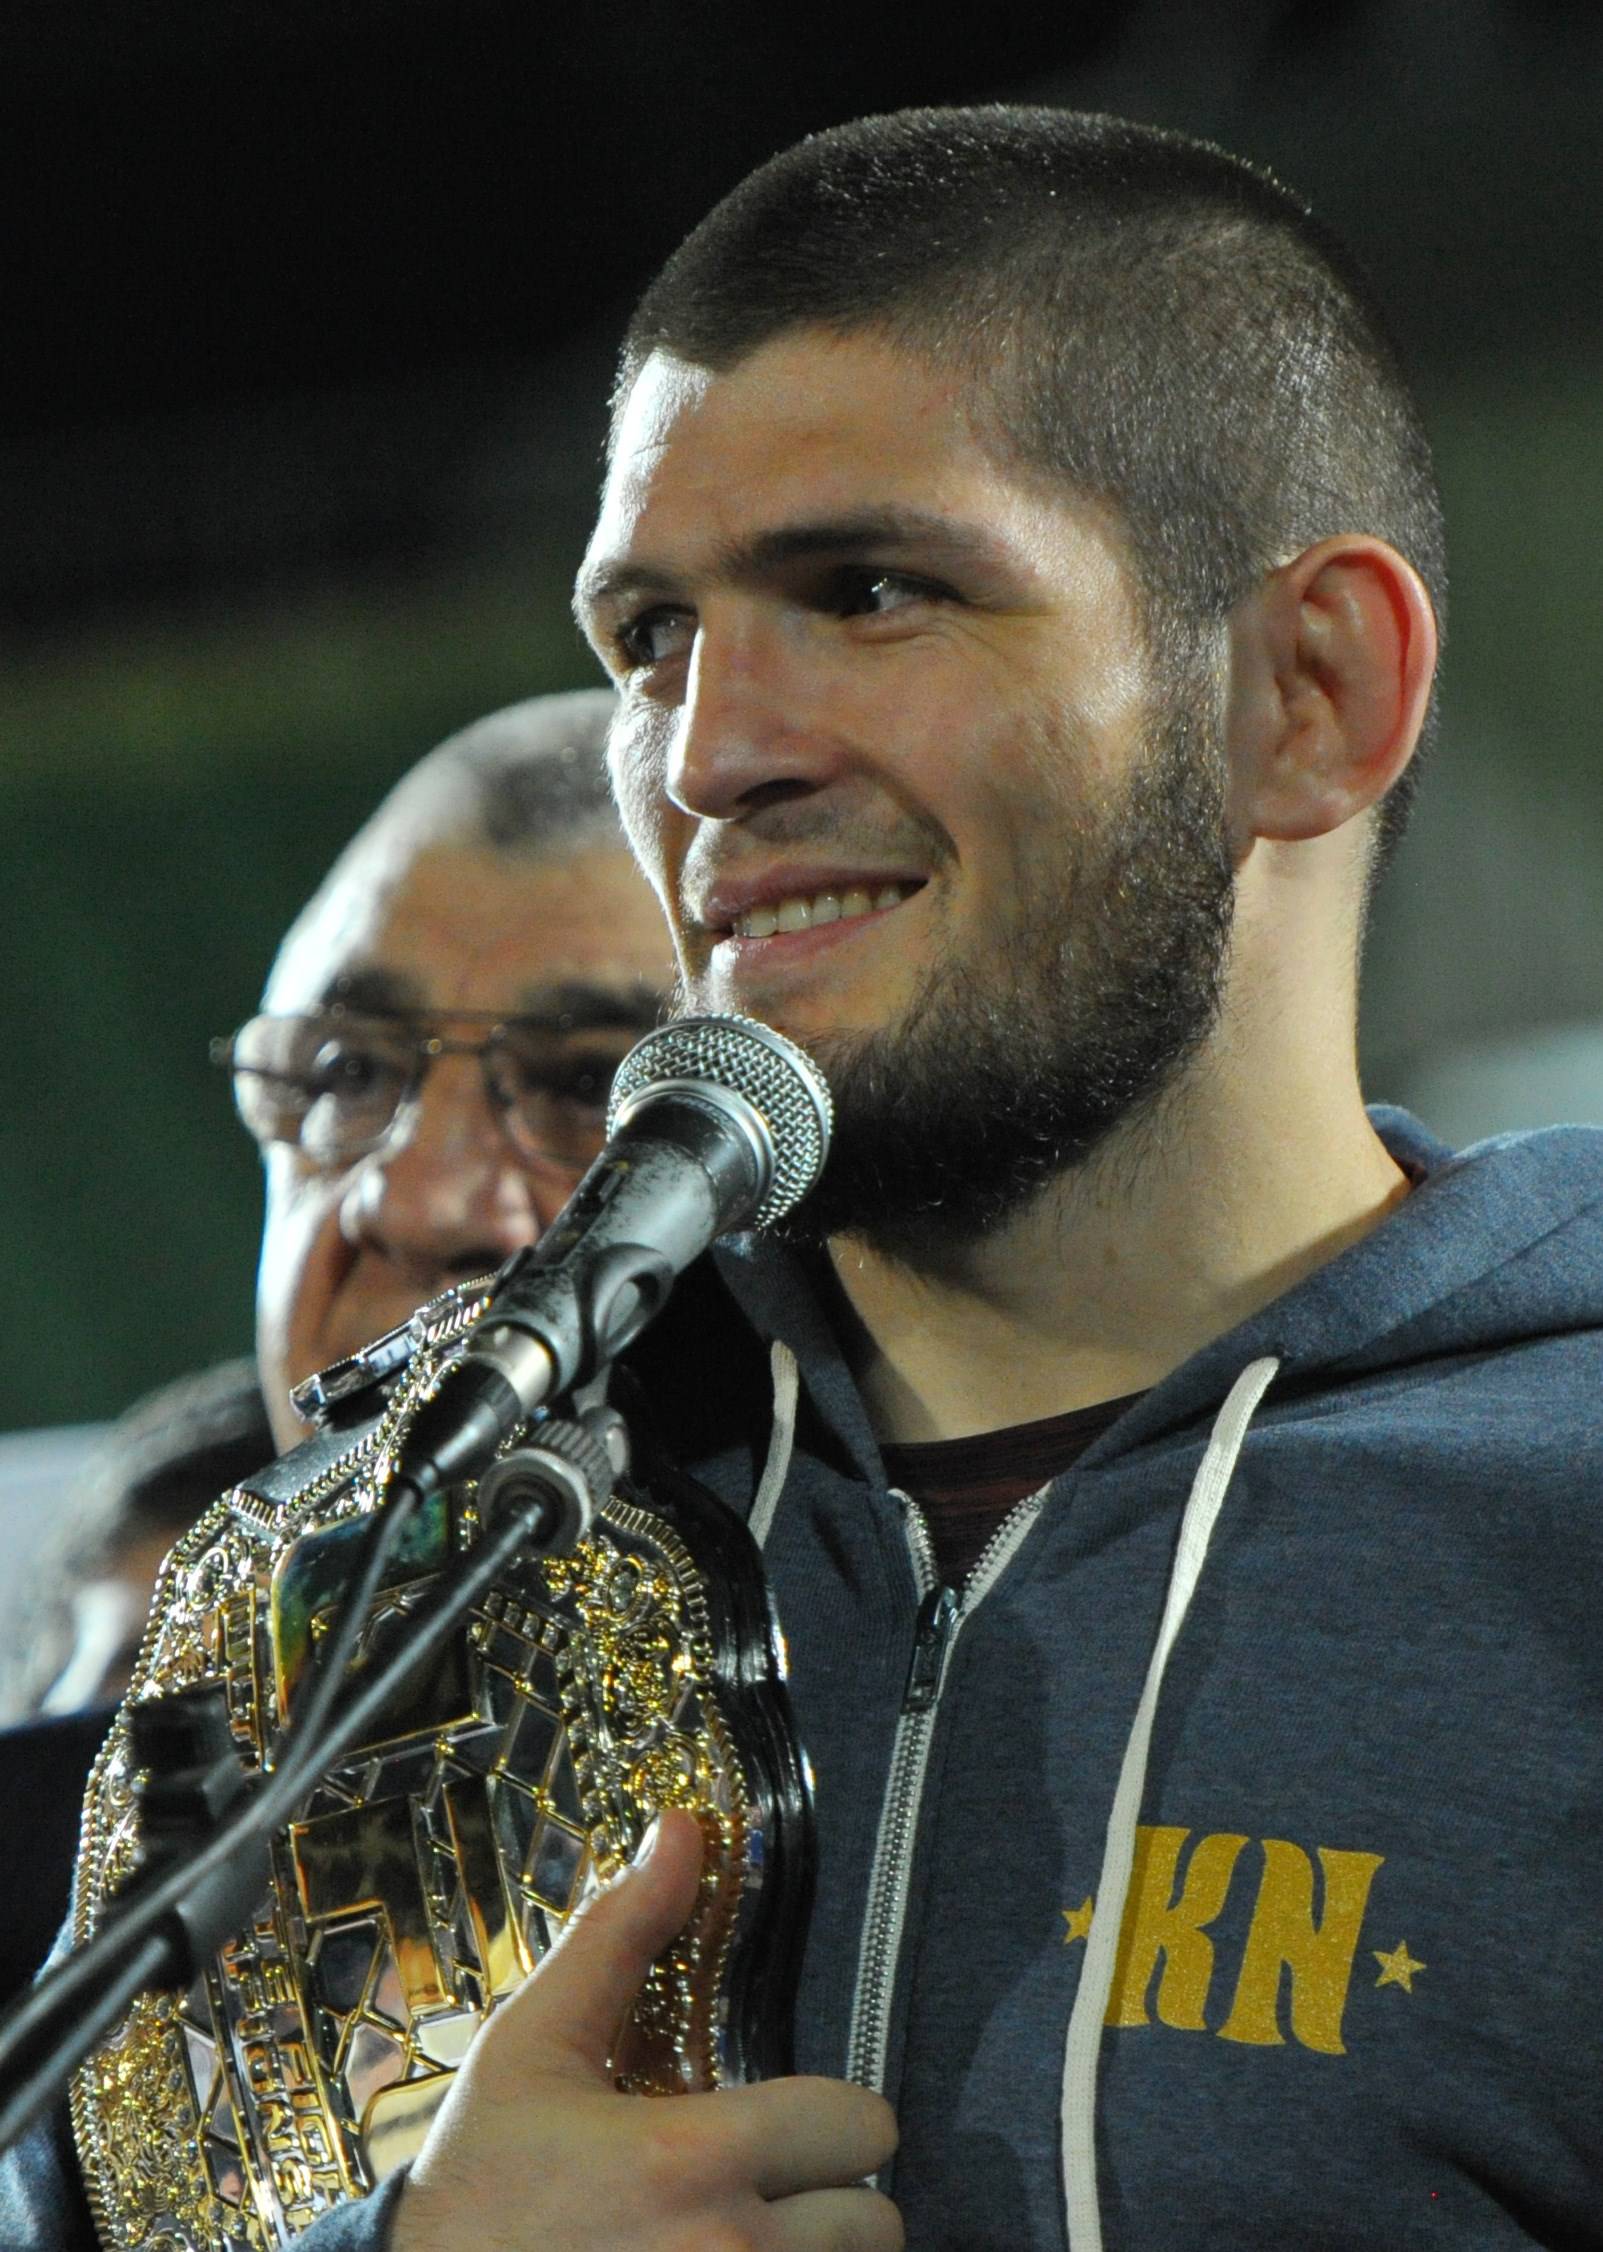 Russia's Nurmagomedov, UFC lightweight champion who defeated McGregor of Ireland in the main event of UFC 229, attends the ceremony of honouring him at Anzhi Arena in Kaspiysk